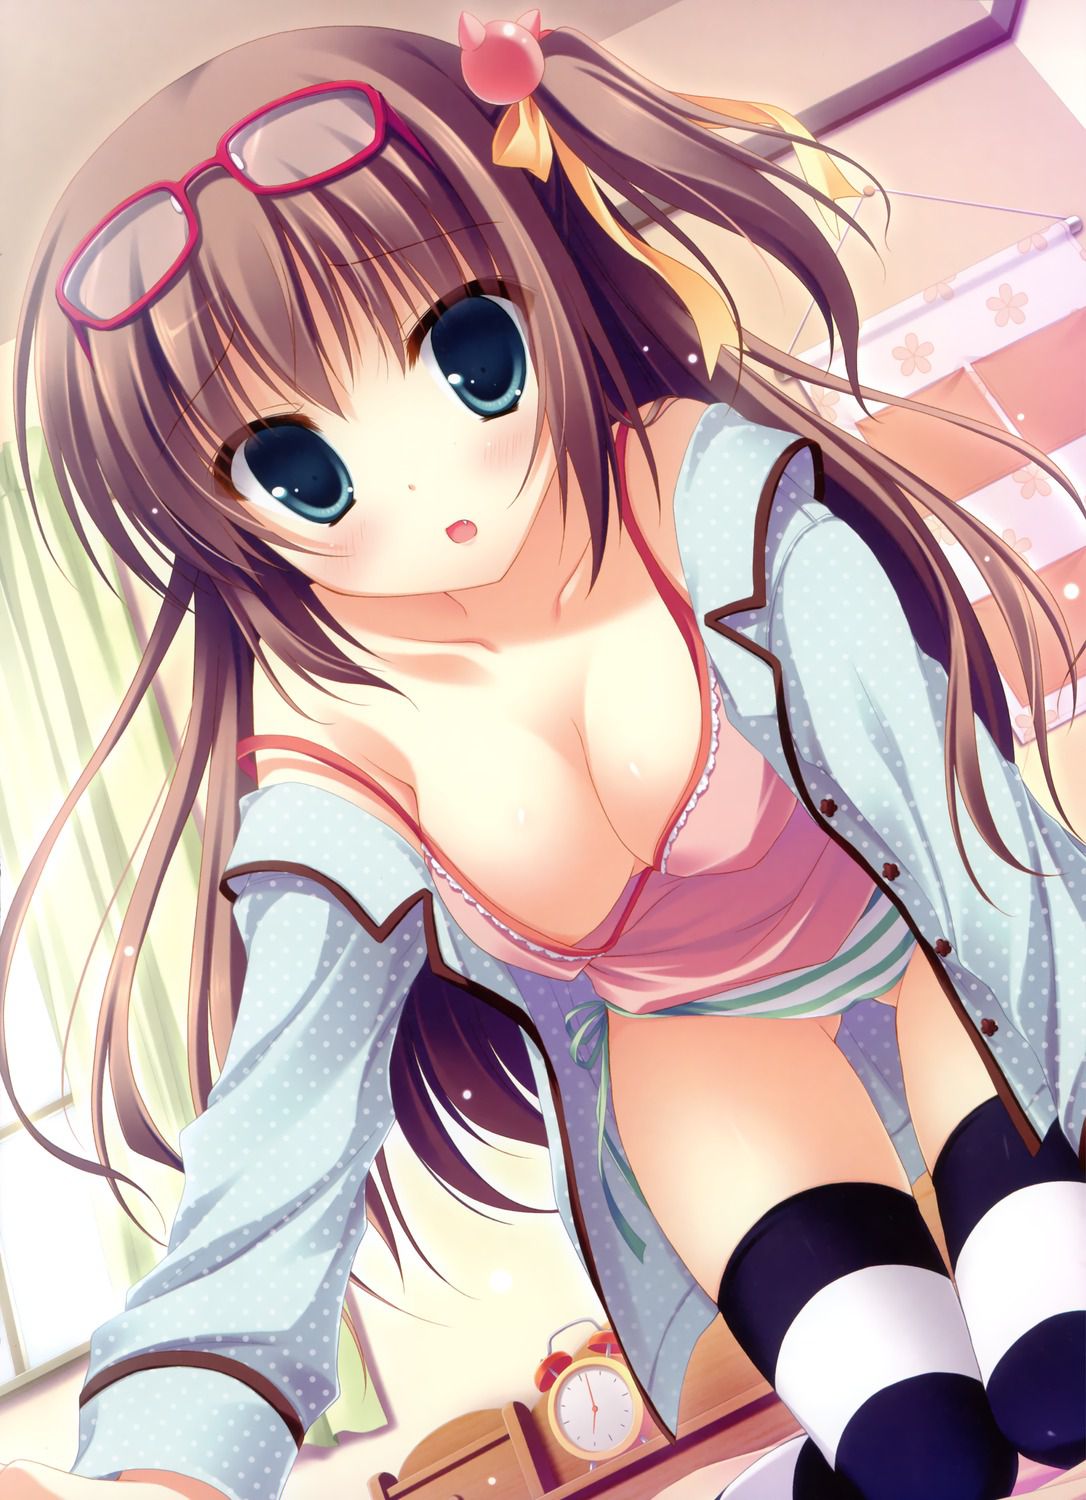 Two-dimensional beautiful girl's Erokawa image is pasted intently vol.958 51